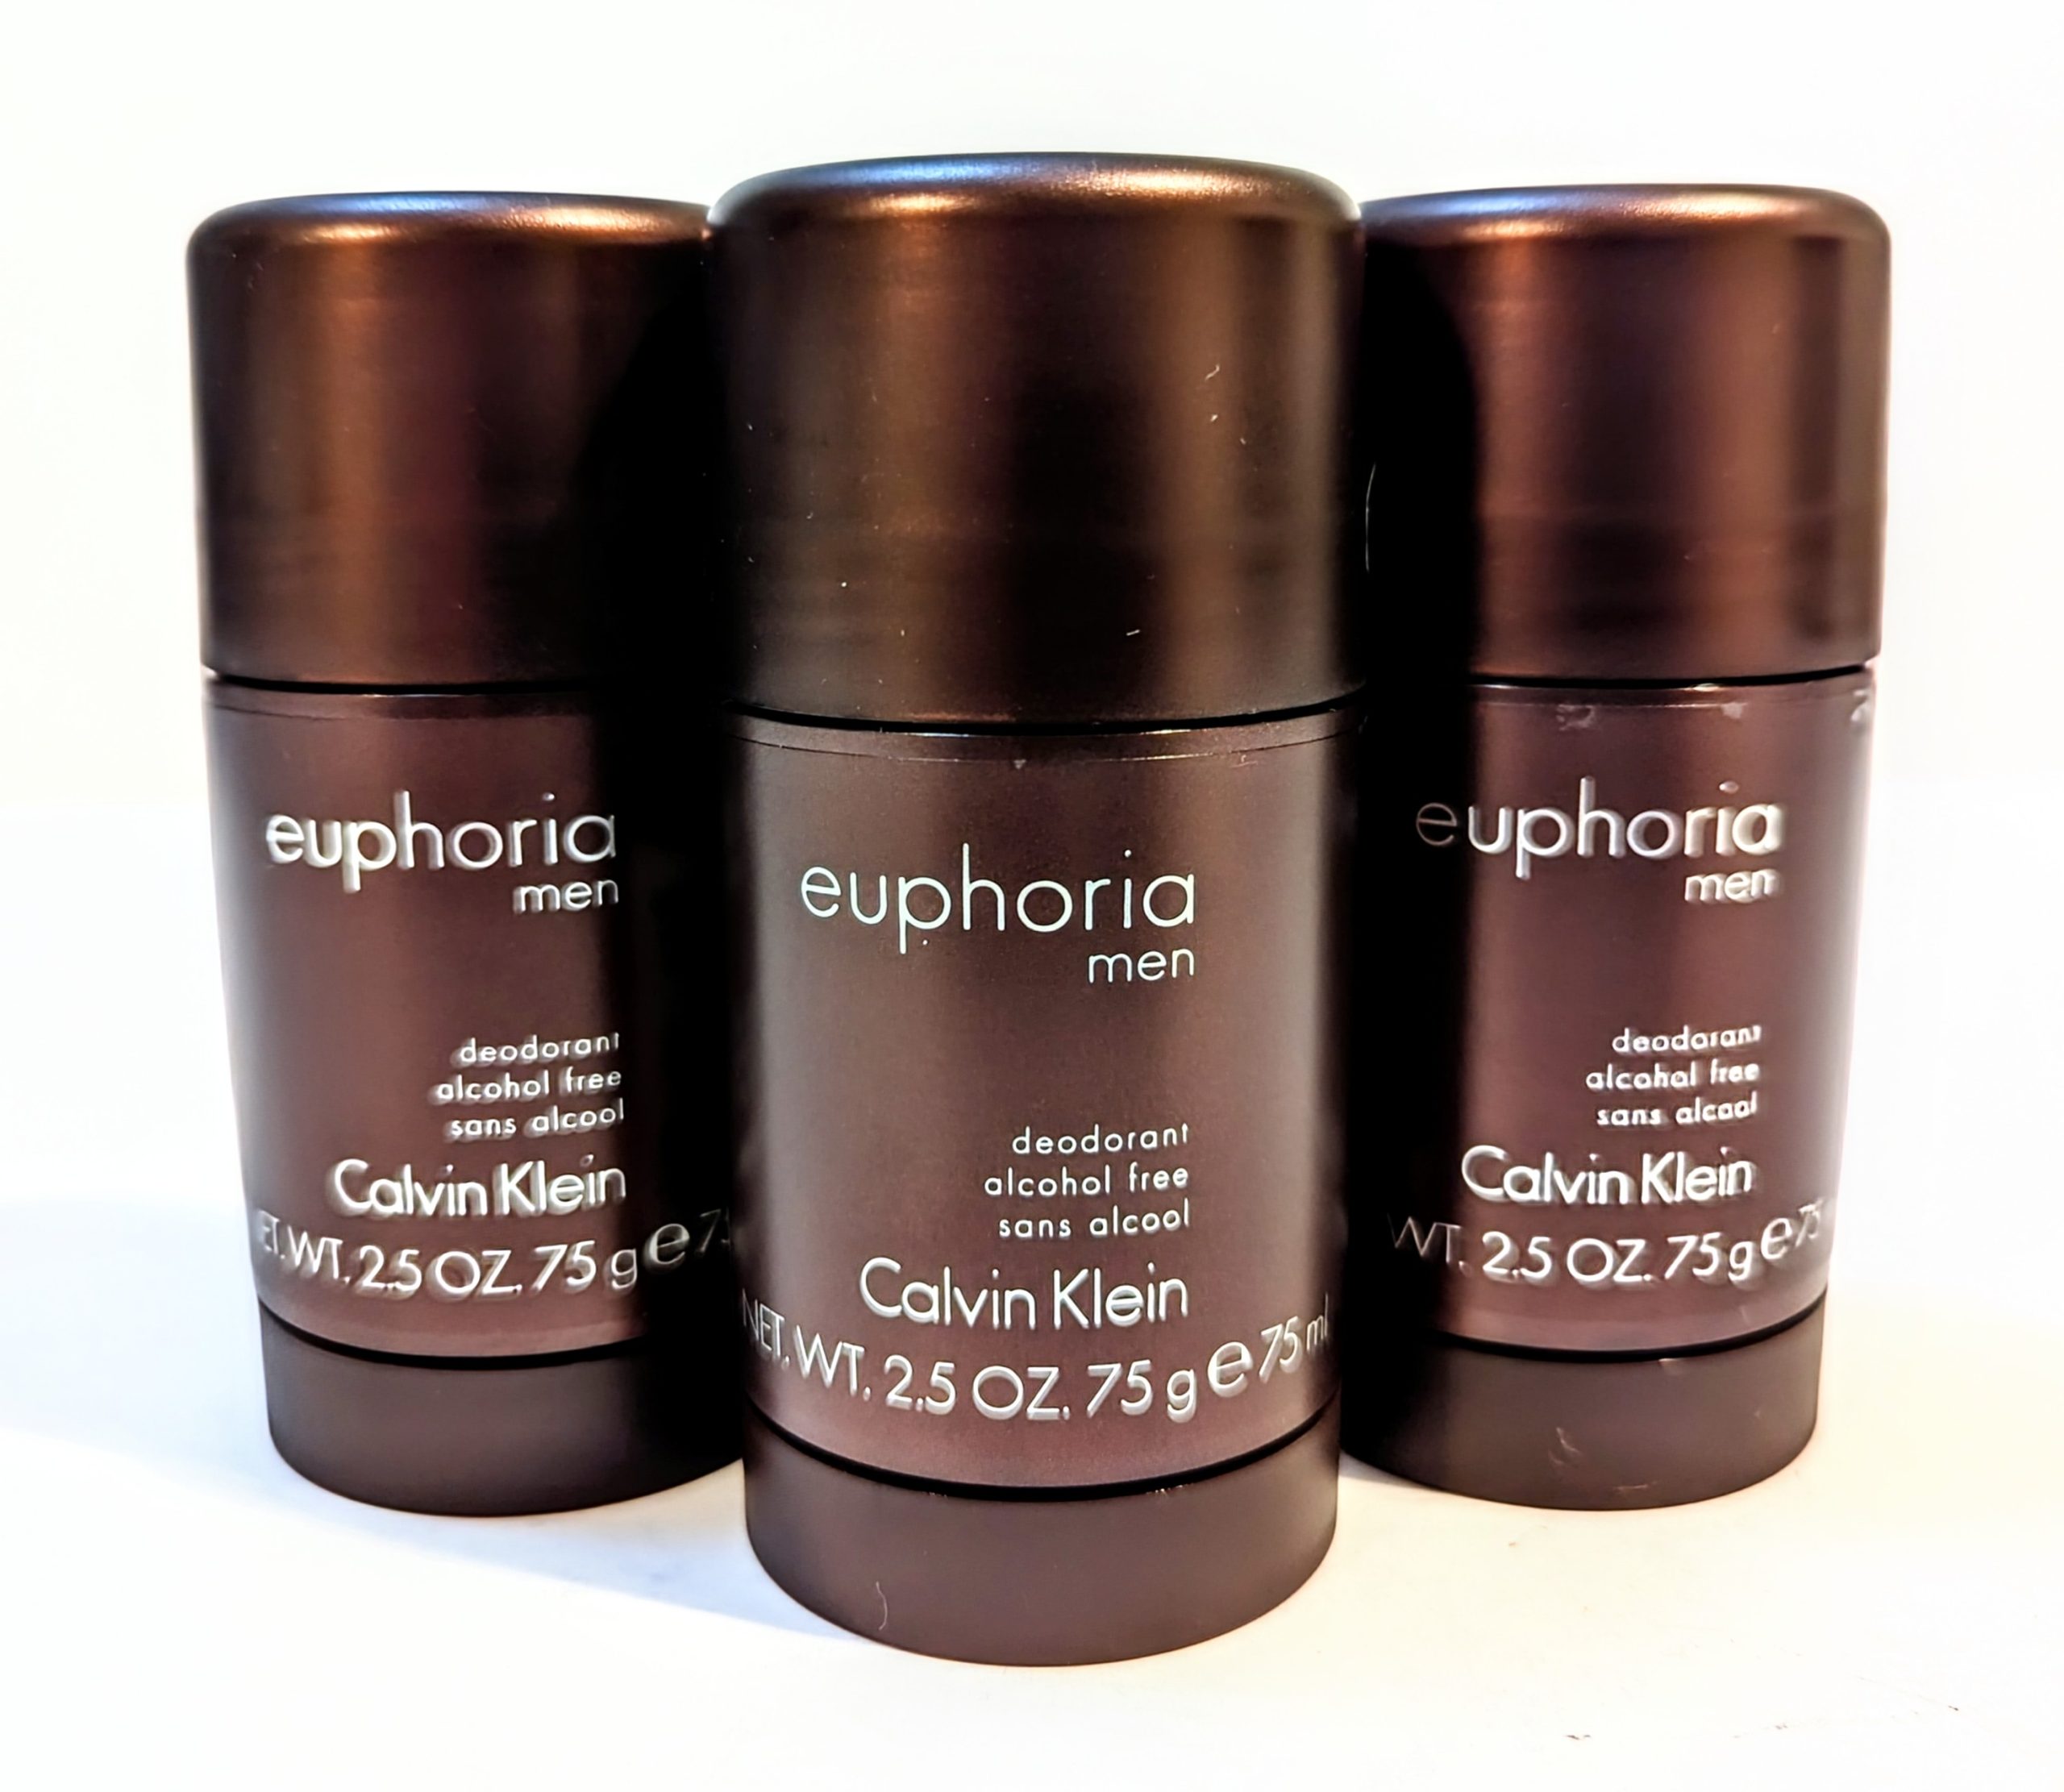 Three brown containers of Calvin Klein’s Euphoria Men deodorant are displayed. Each is labeled as alcohol-free and weighs 2.5 oz (75 g).